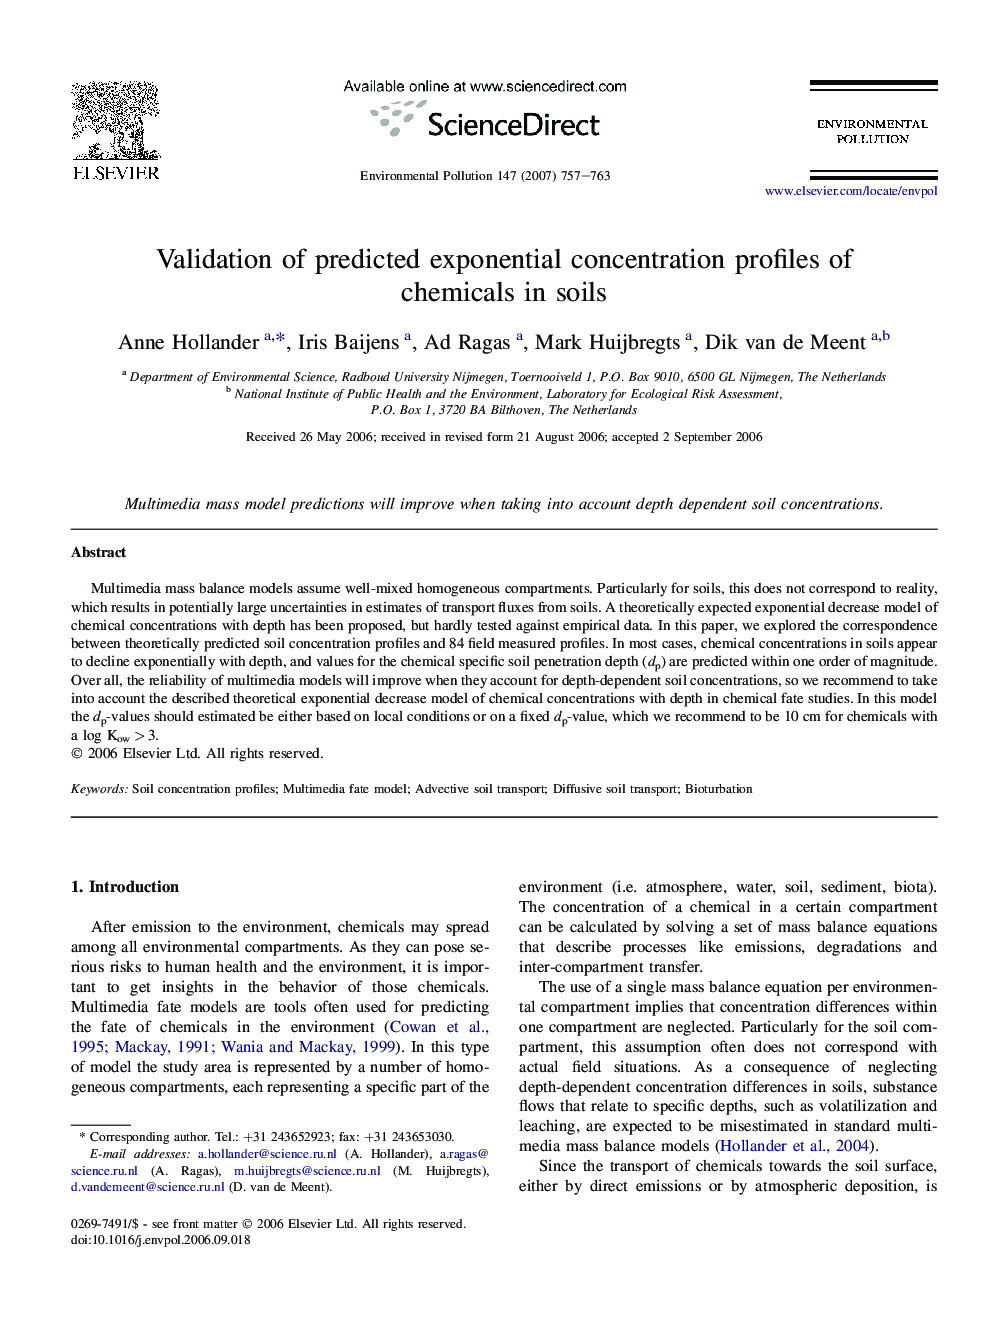 Validation of predicted exponential concentration profiles of chemicals in soils